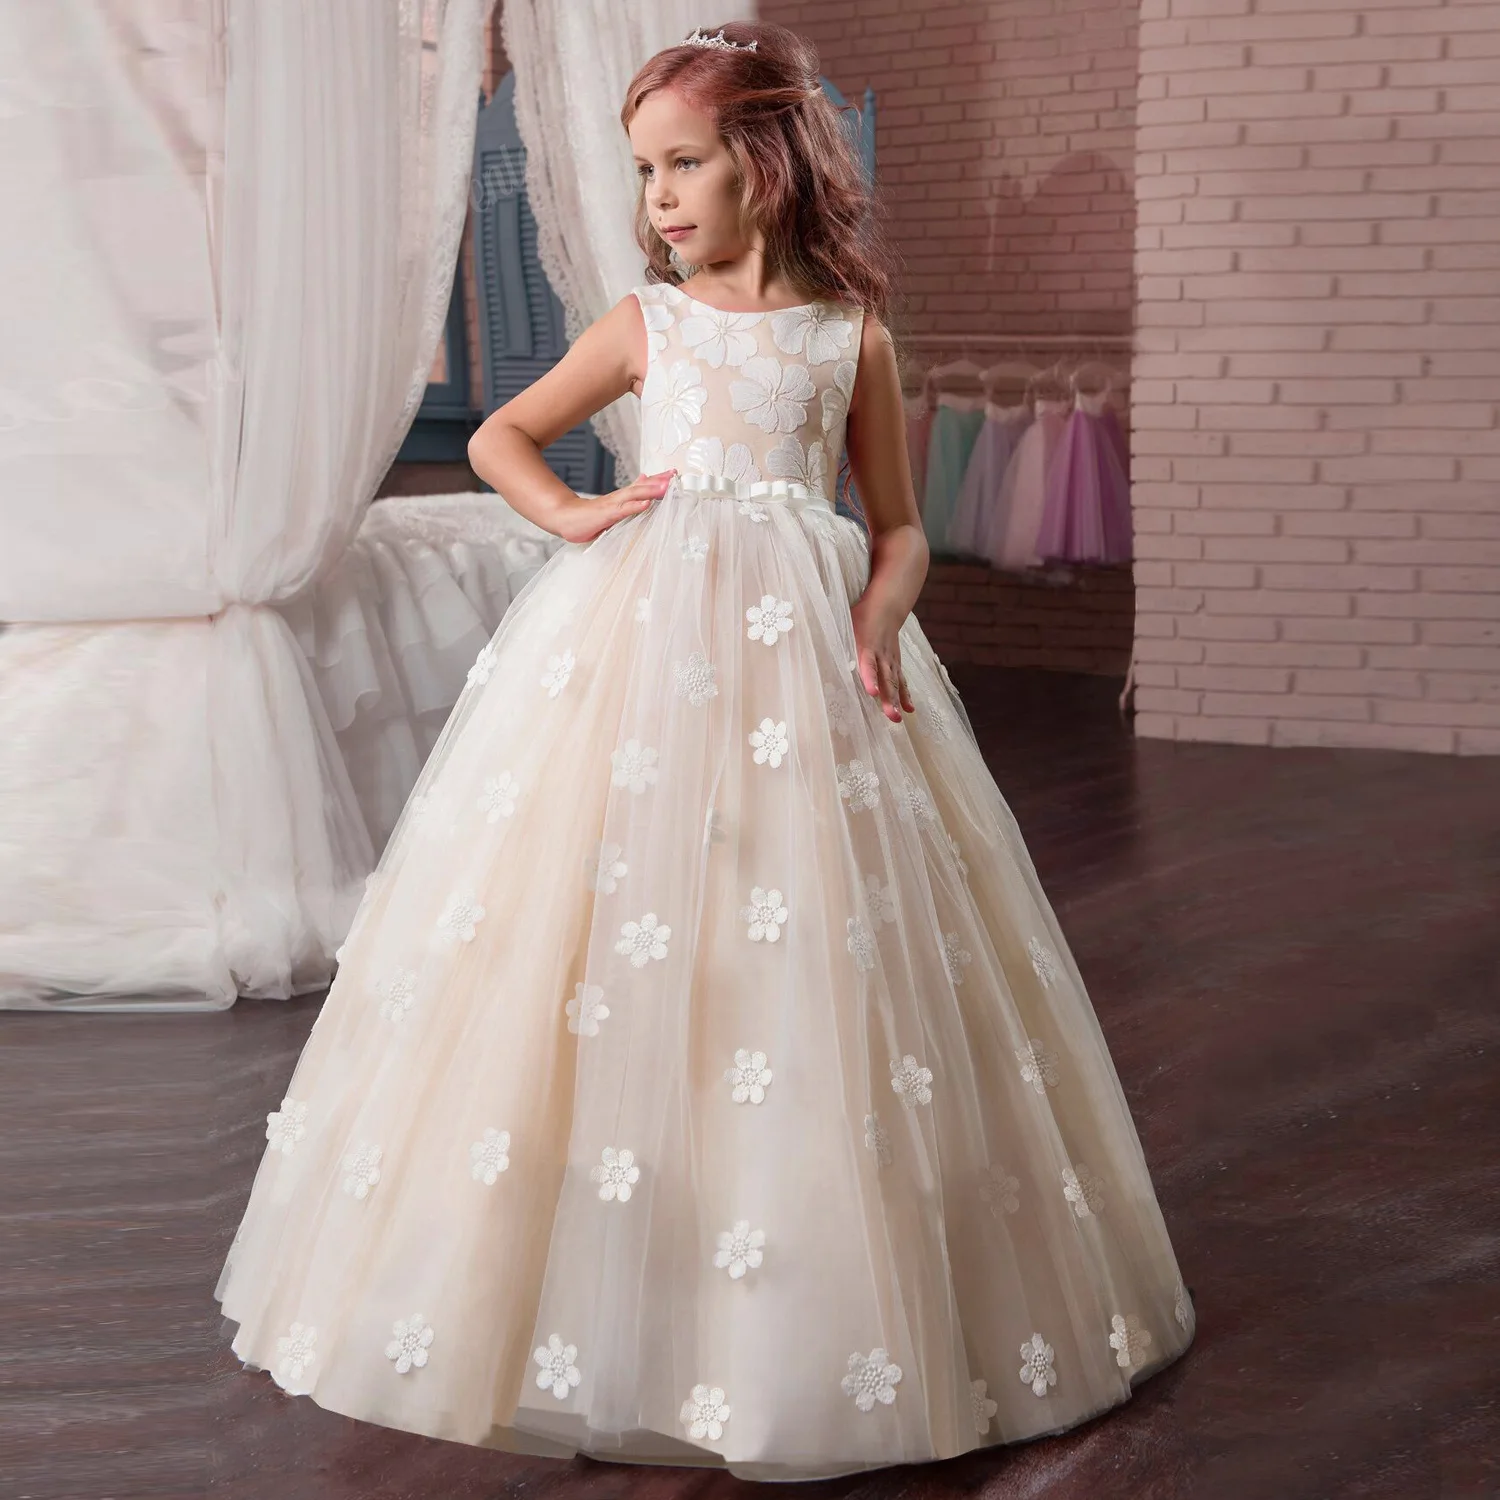 US Girls Princess Dress Party Formal Wedding Birthday Maxi Lace Tulle Prom Gown 